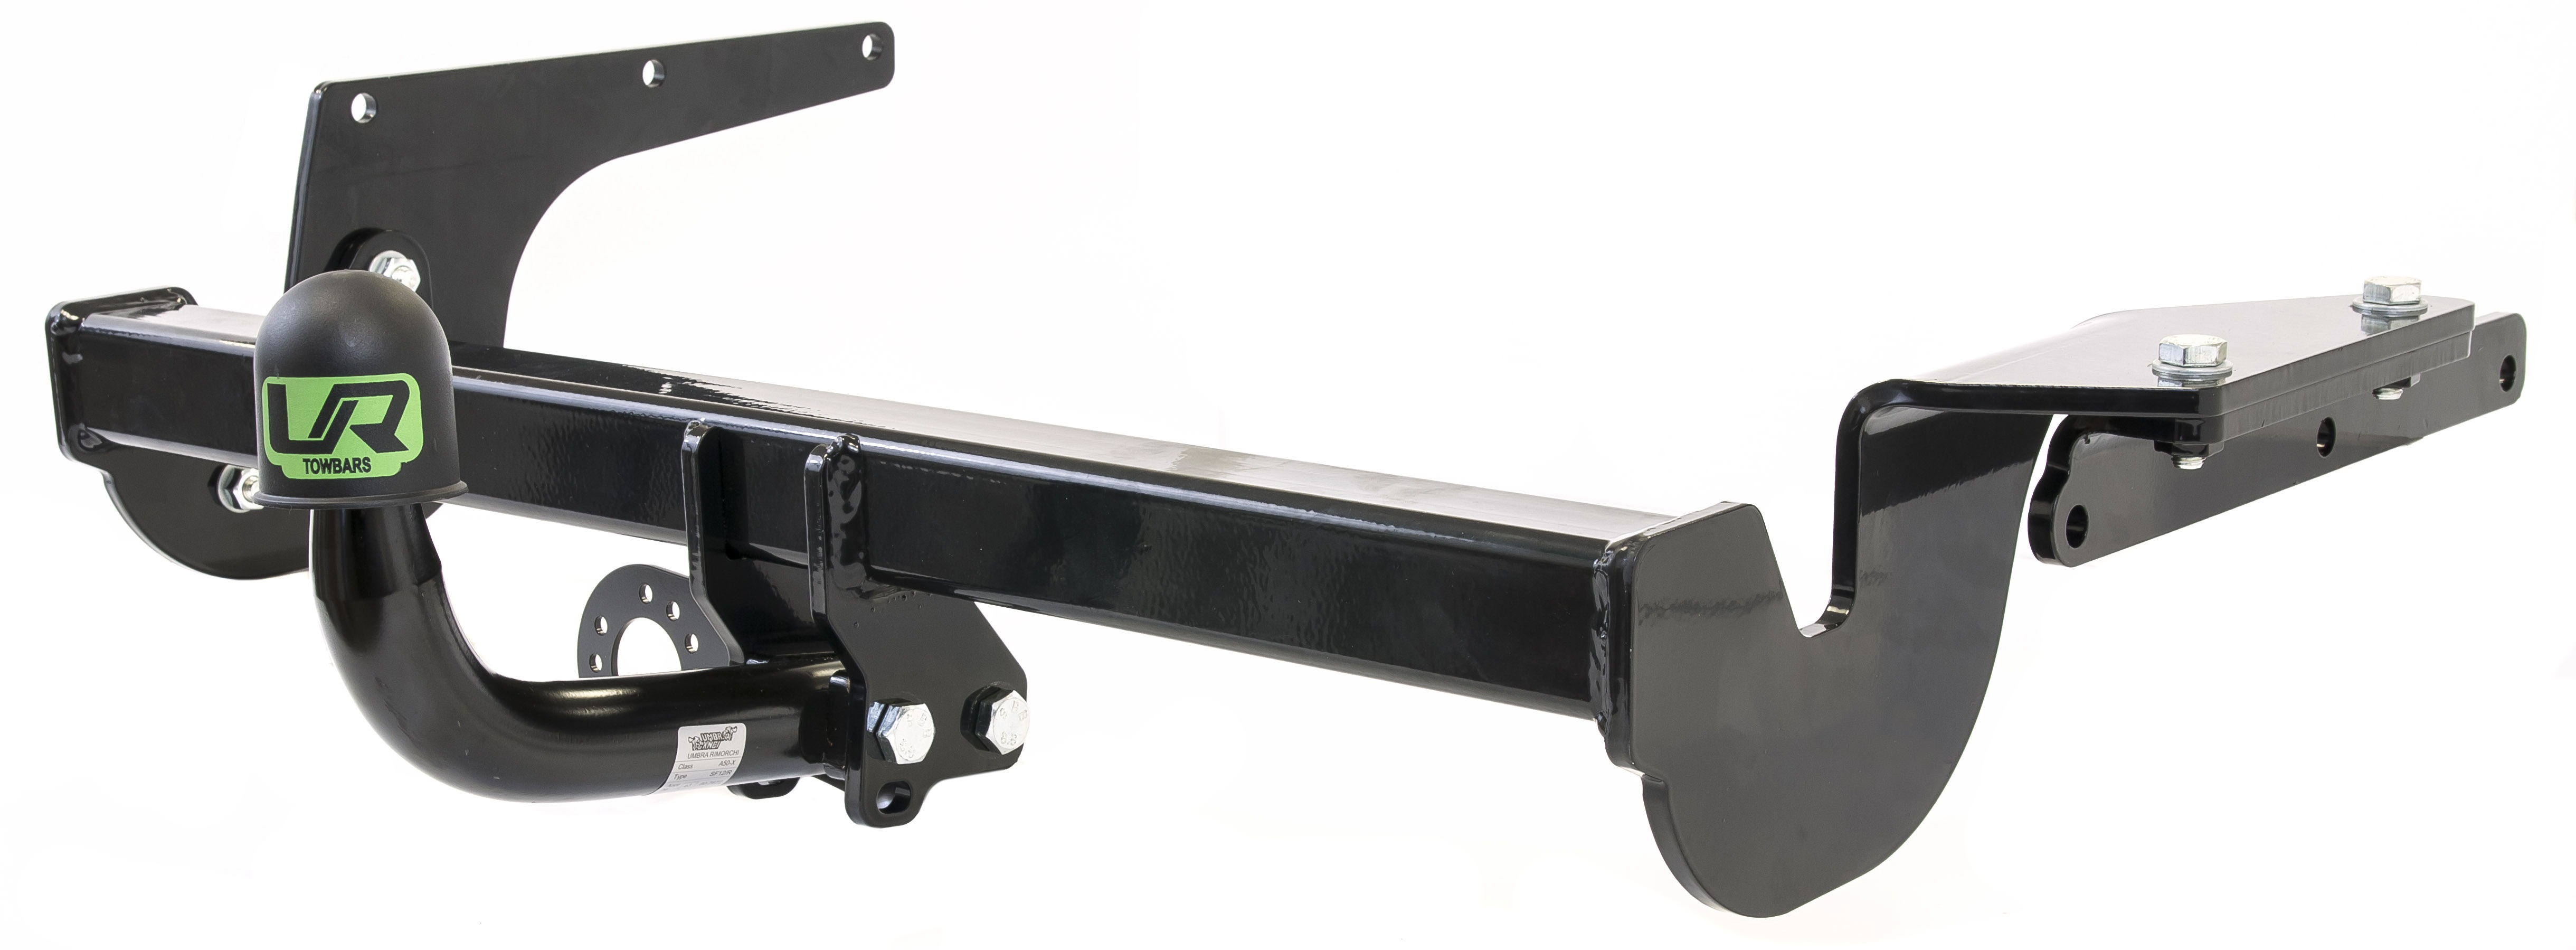 Tow Bars for Cars